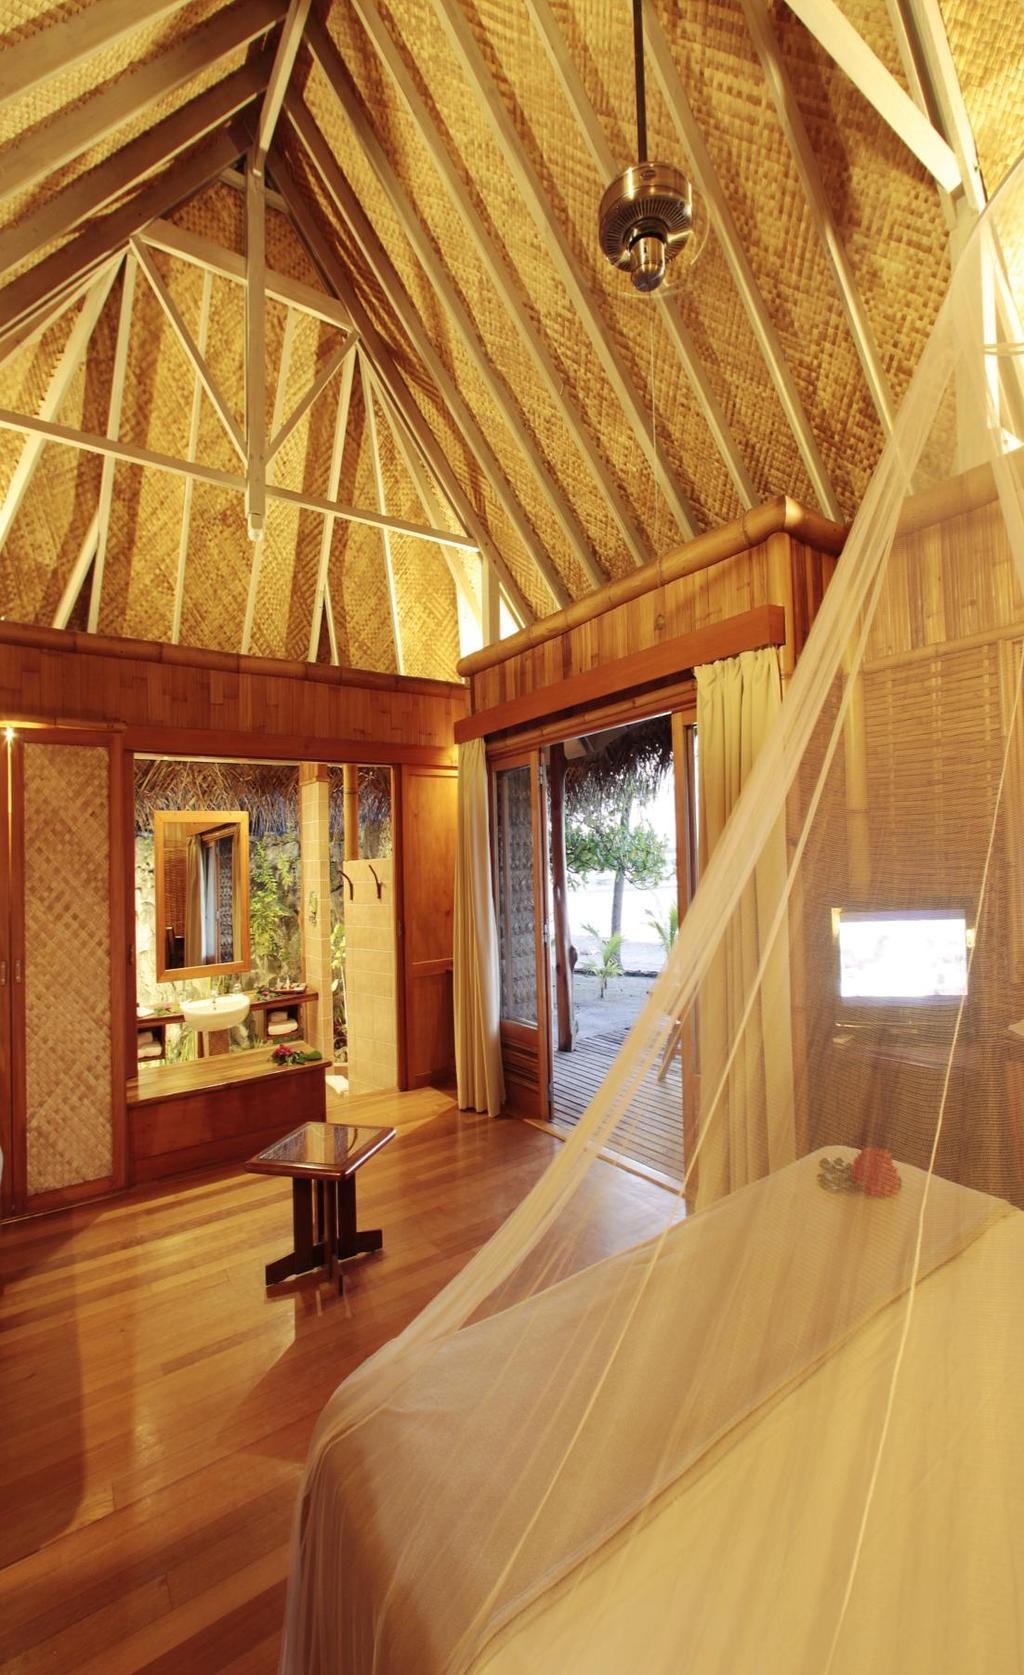 ACCOMMODATIONS All accommodations are designed in true Polynesian style, with thatched roofs made of coconut, bamboo, teak and local wood.